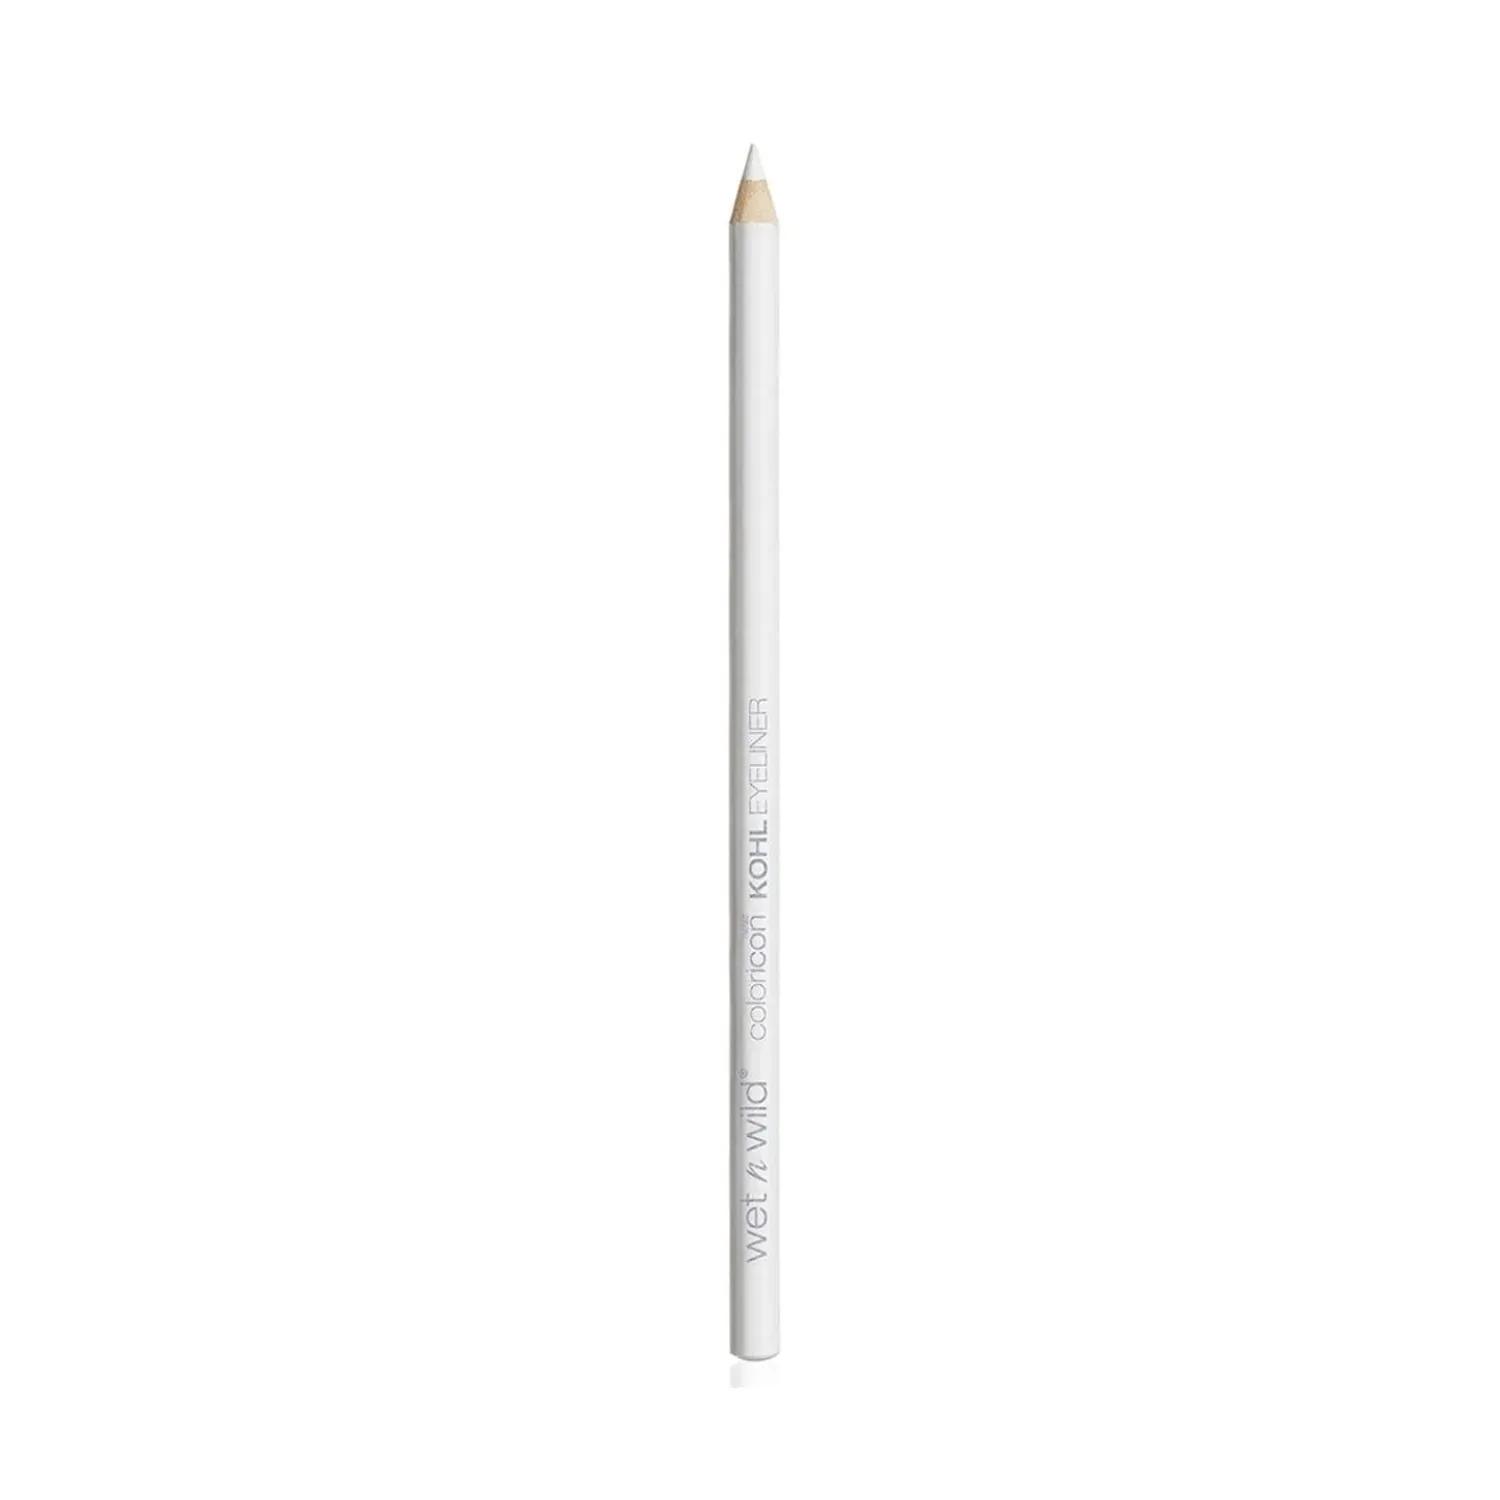 wet-n-wild-color-icon-kohl-liner-pencil---you're-always-white-(1.4g)